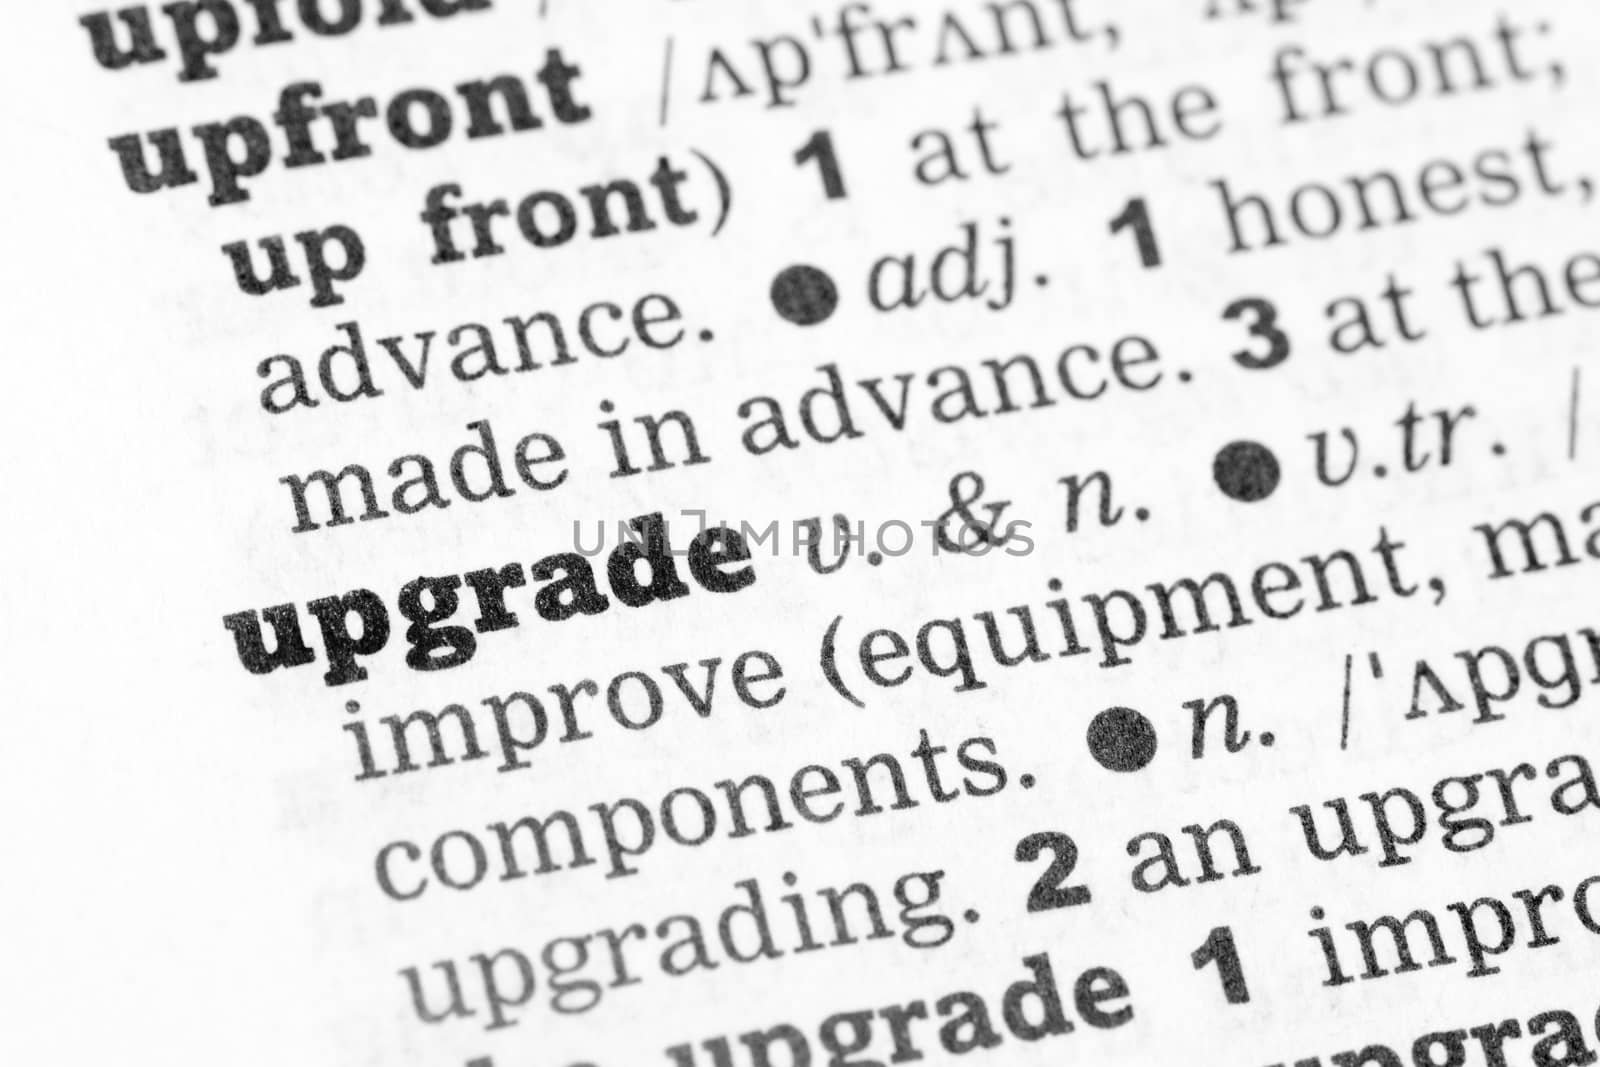 Upgrade Dictionary Definition single word with soft focus